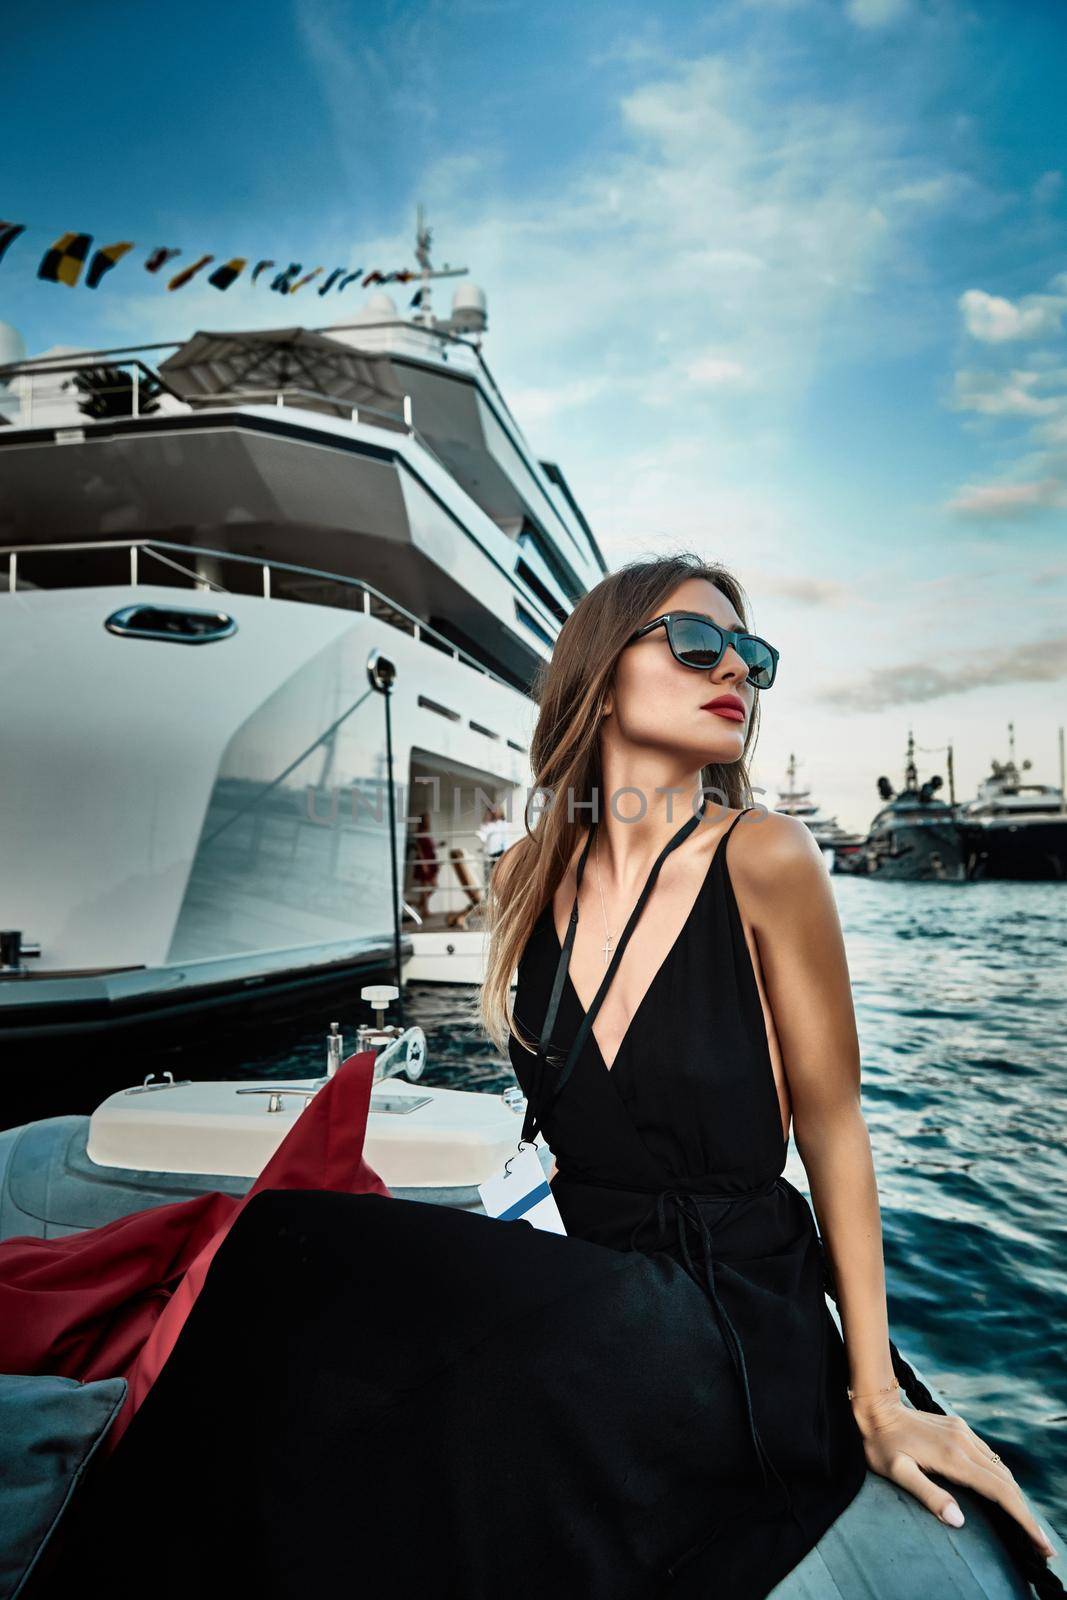 Monaco, Monte-Carlo, 27 September 2019: A glamorous girl in an evening dress of black color and sunglasses on the boat carry to the big yacht, Monaco